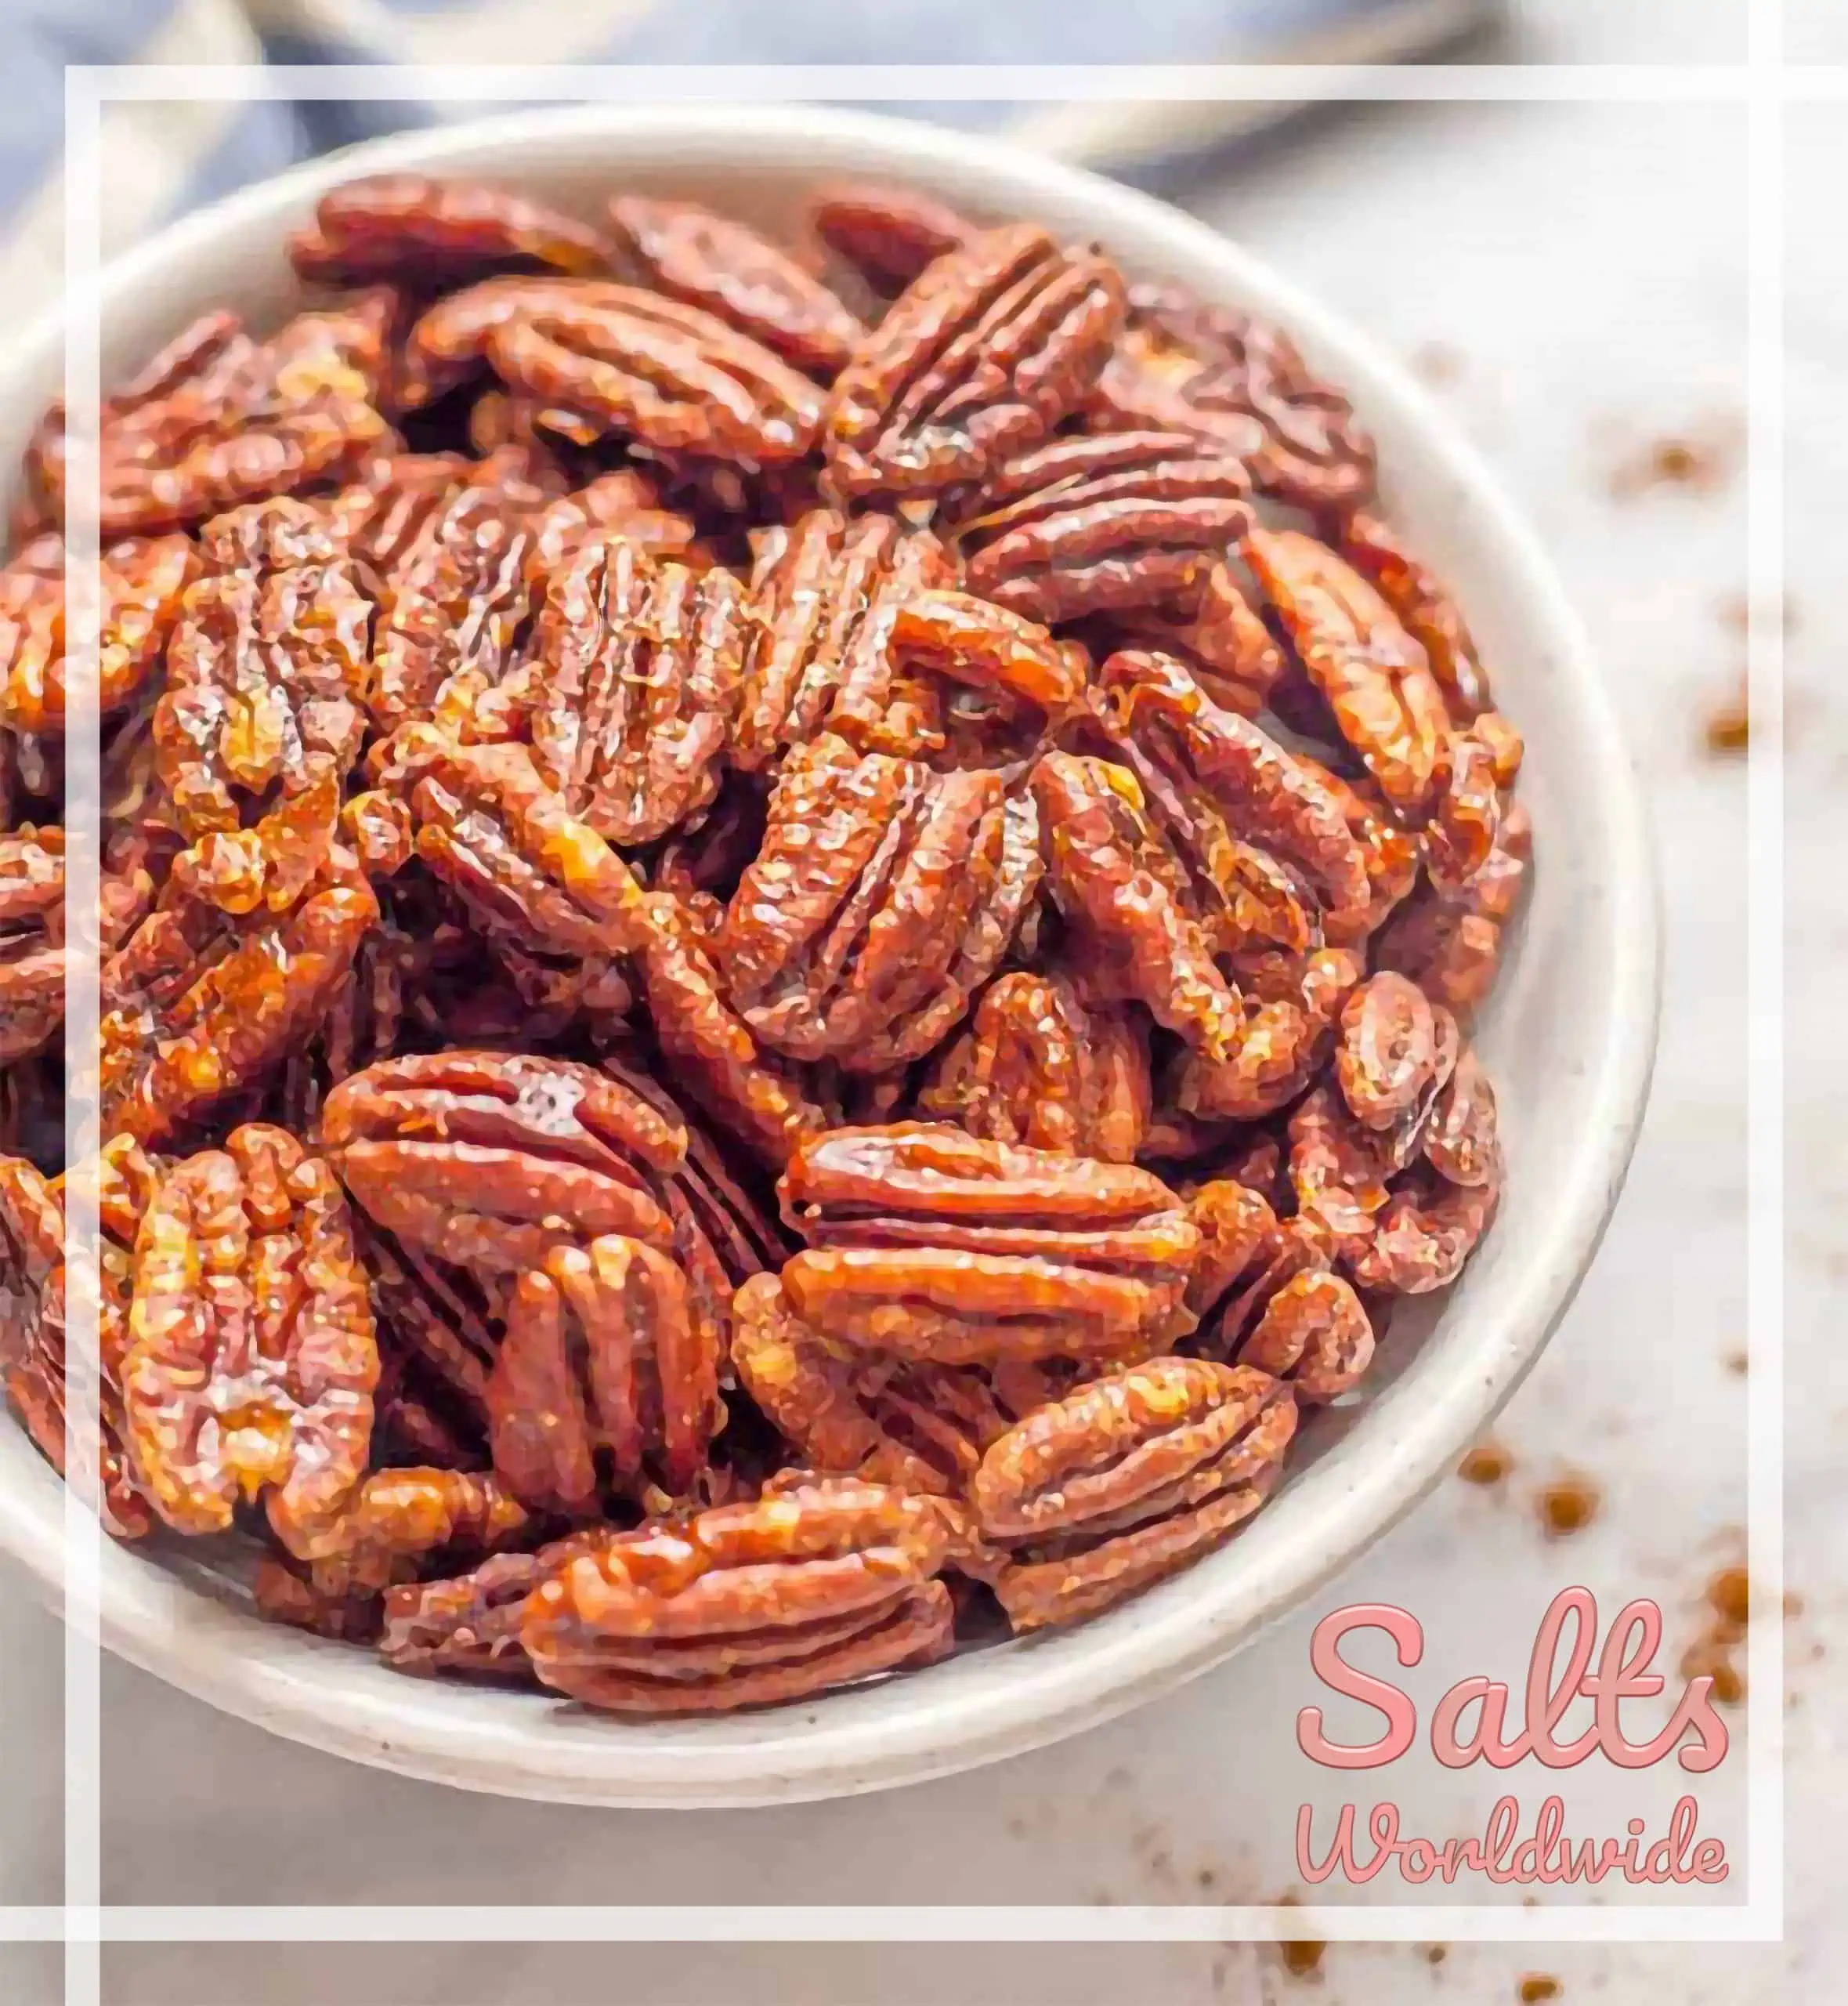 Make Pecans Part of Your Holiday Snacks: The Tremendous Health Benefits of Pecans Make Them a Must Have 1